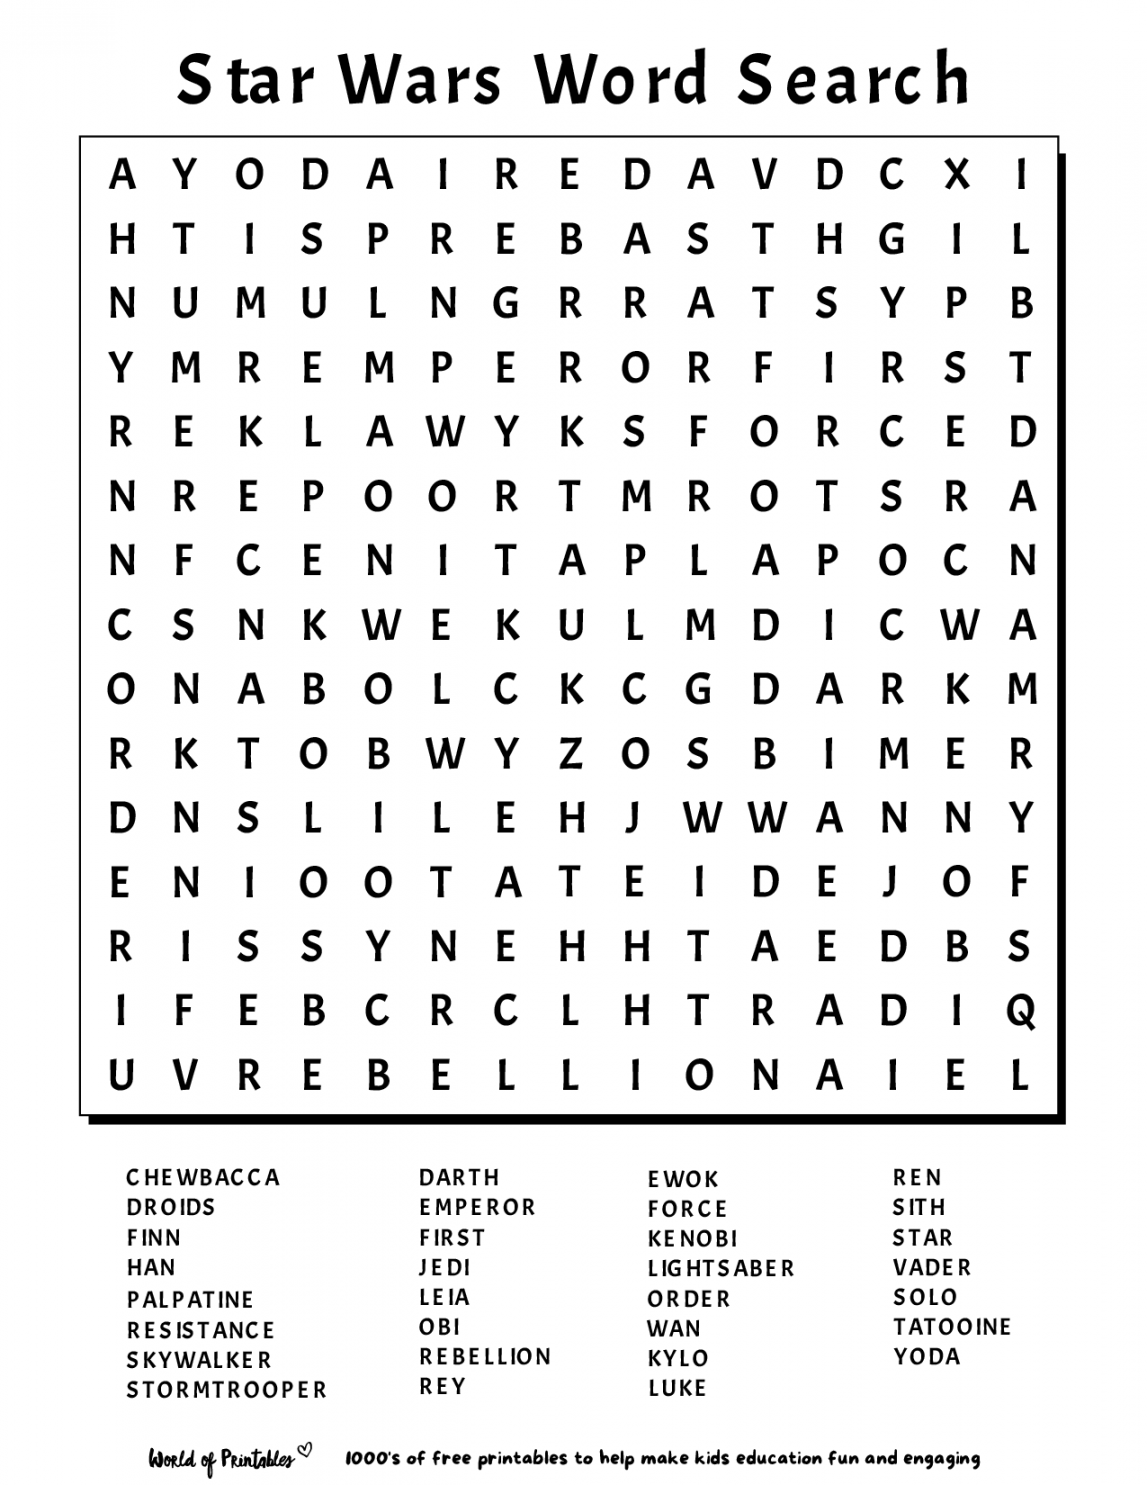 Free Printable Word Searches Large Print - Printable - Printable Word Search  World of Printables